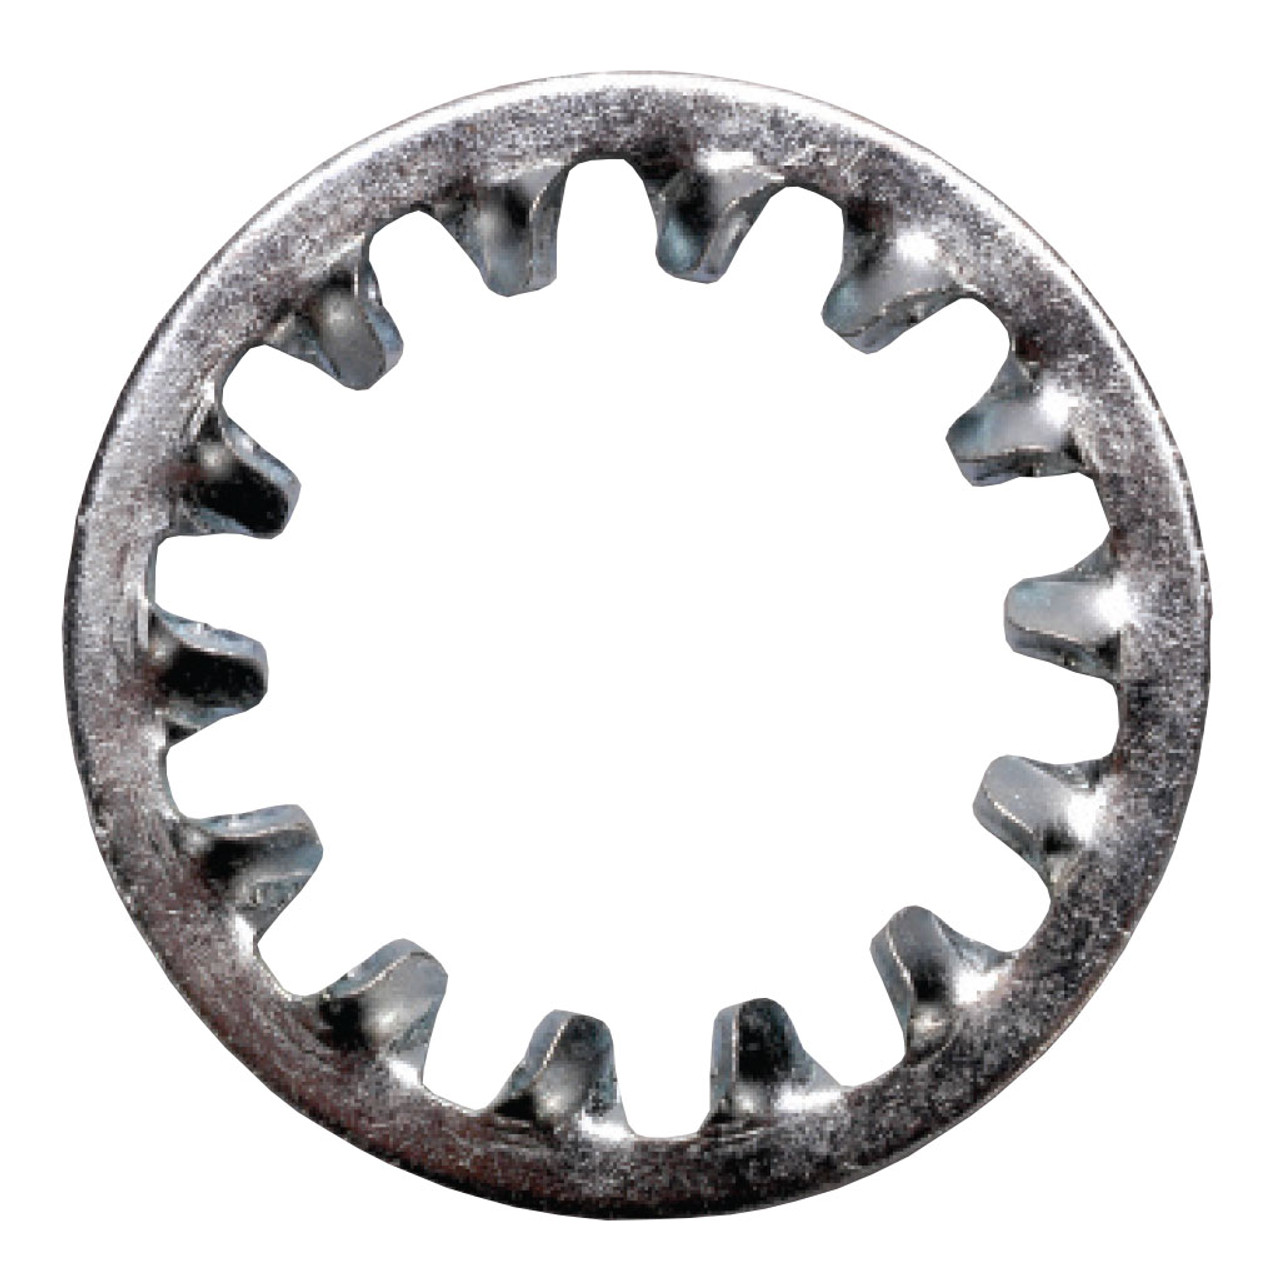 Details about   3/4" Star Lock Washers Internal Tooth 410 Stainless Steel Qty 100 